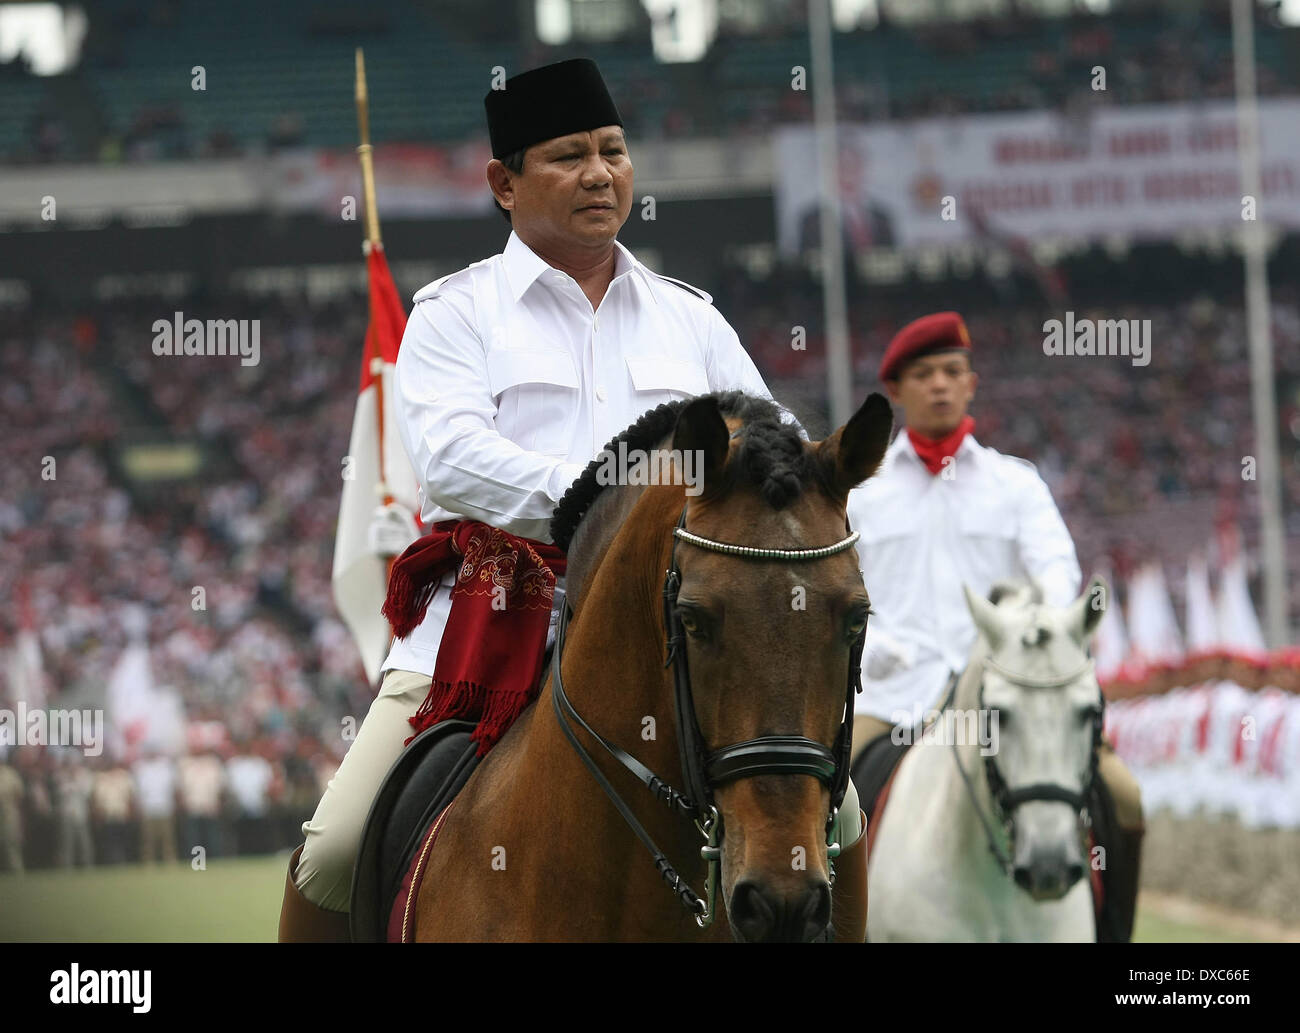 Central Jakarta, Jakarta, Indonesia. 23rd Mar, 2014. PRABOWO SUBIANTO (Center), the presidential candidate for the Great Indonesia Movement or Gerindra, parades on horseback as he inspects a roll call of supporters as he attends a campaign gathering ahead of the legislative elections in Gelora Bung Karmo Staduim. PRABOWO SUBIANTO, the former commander of Indonesia's special forces or Kopassus, is the main rival for popular governor of Jakarta, Joko Widodo, who is also running for president in the country's presidential election on July 9, which will follow a legislative vote on April 9. (Cre Stock Photo